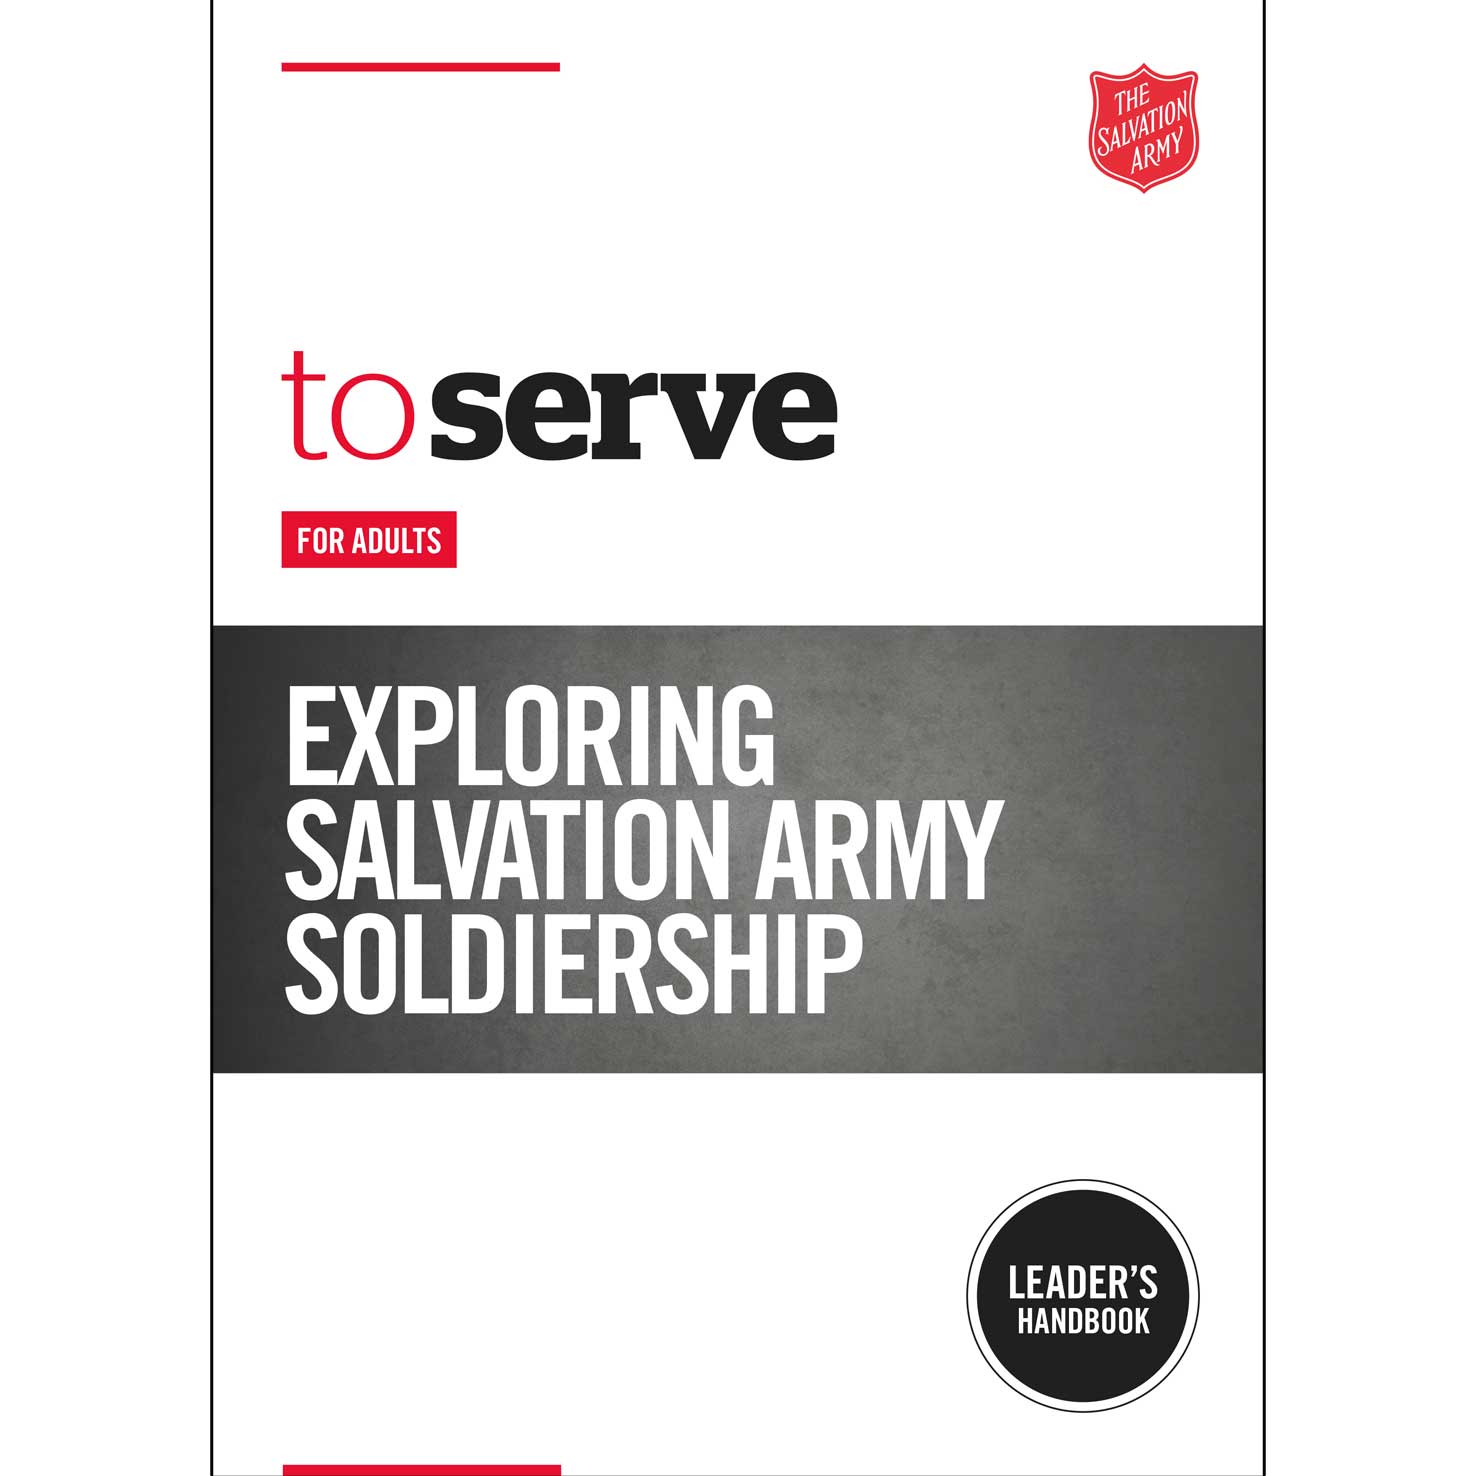 To Serve: Exploring Salvation Army Soldiership - Leader's Handbook for adults